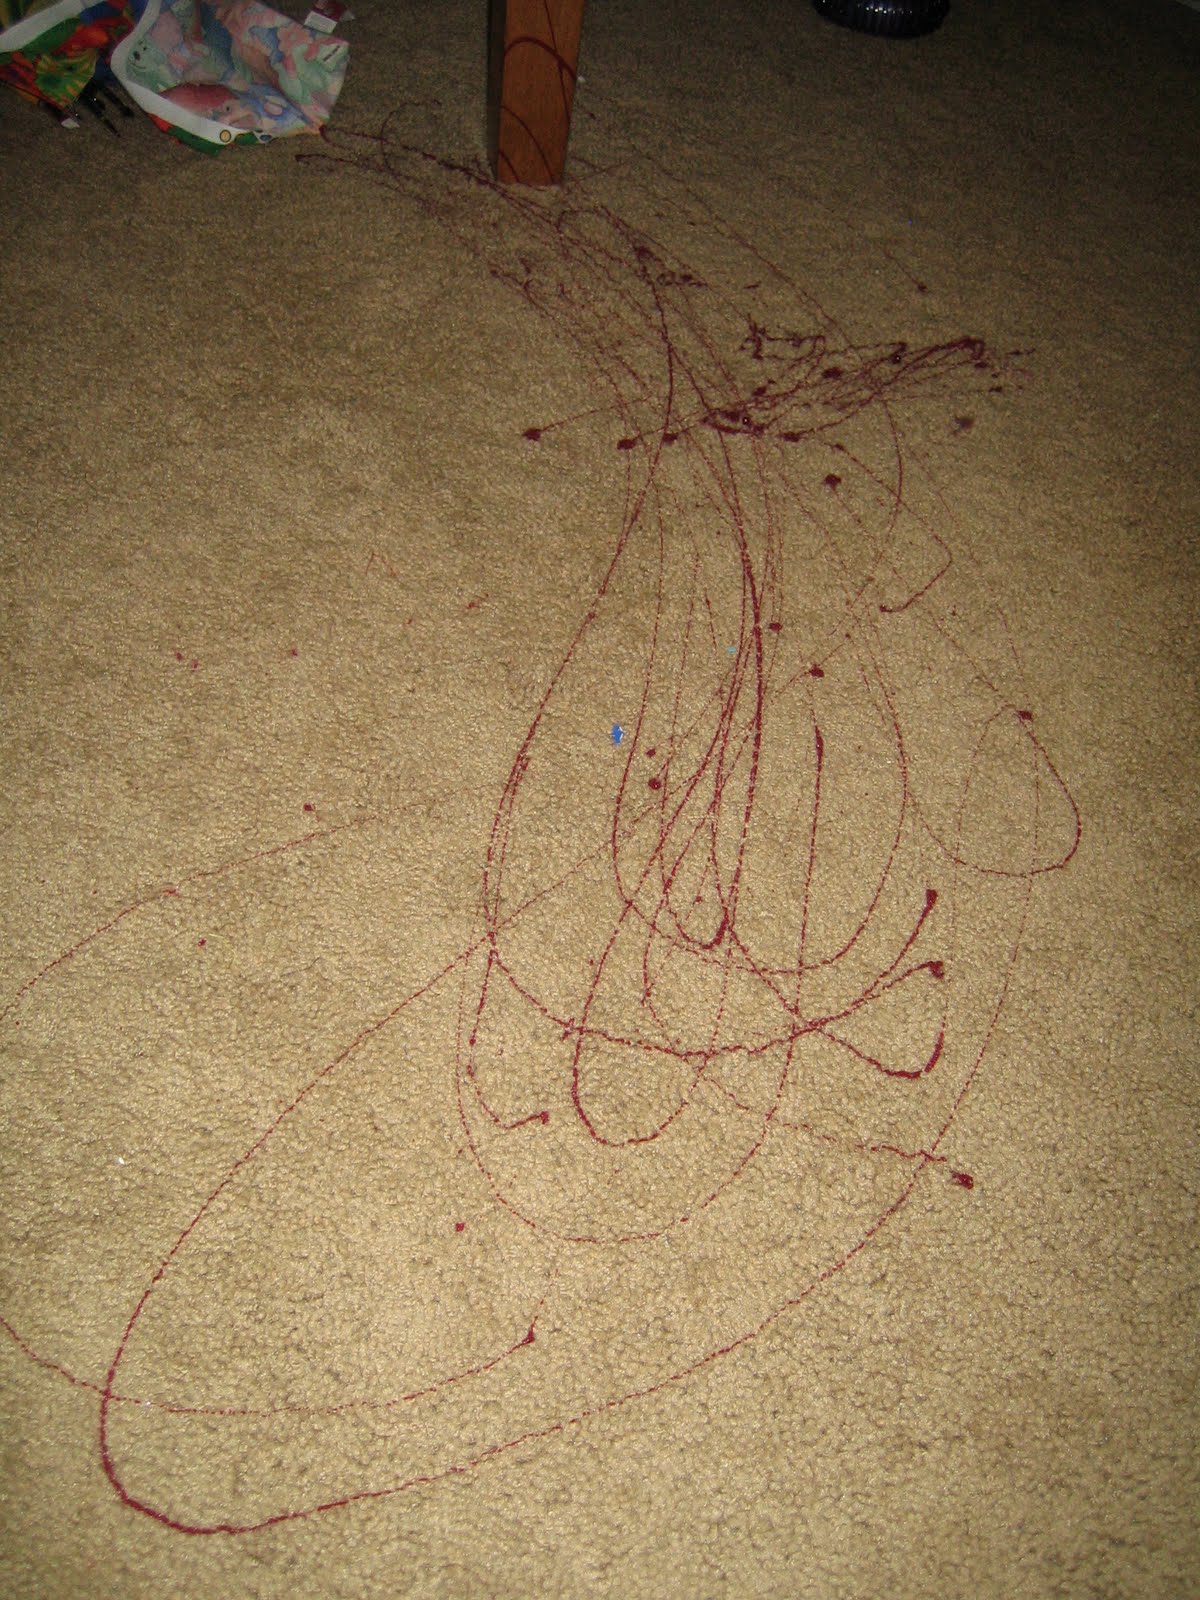 This being an entire bottle of red nail polish poured all over your carpet